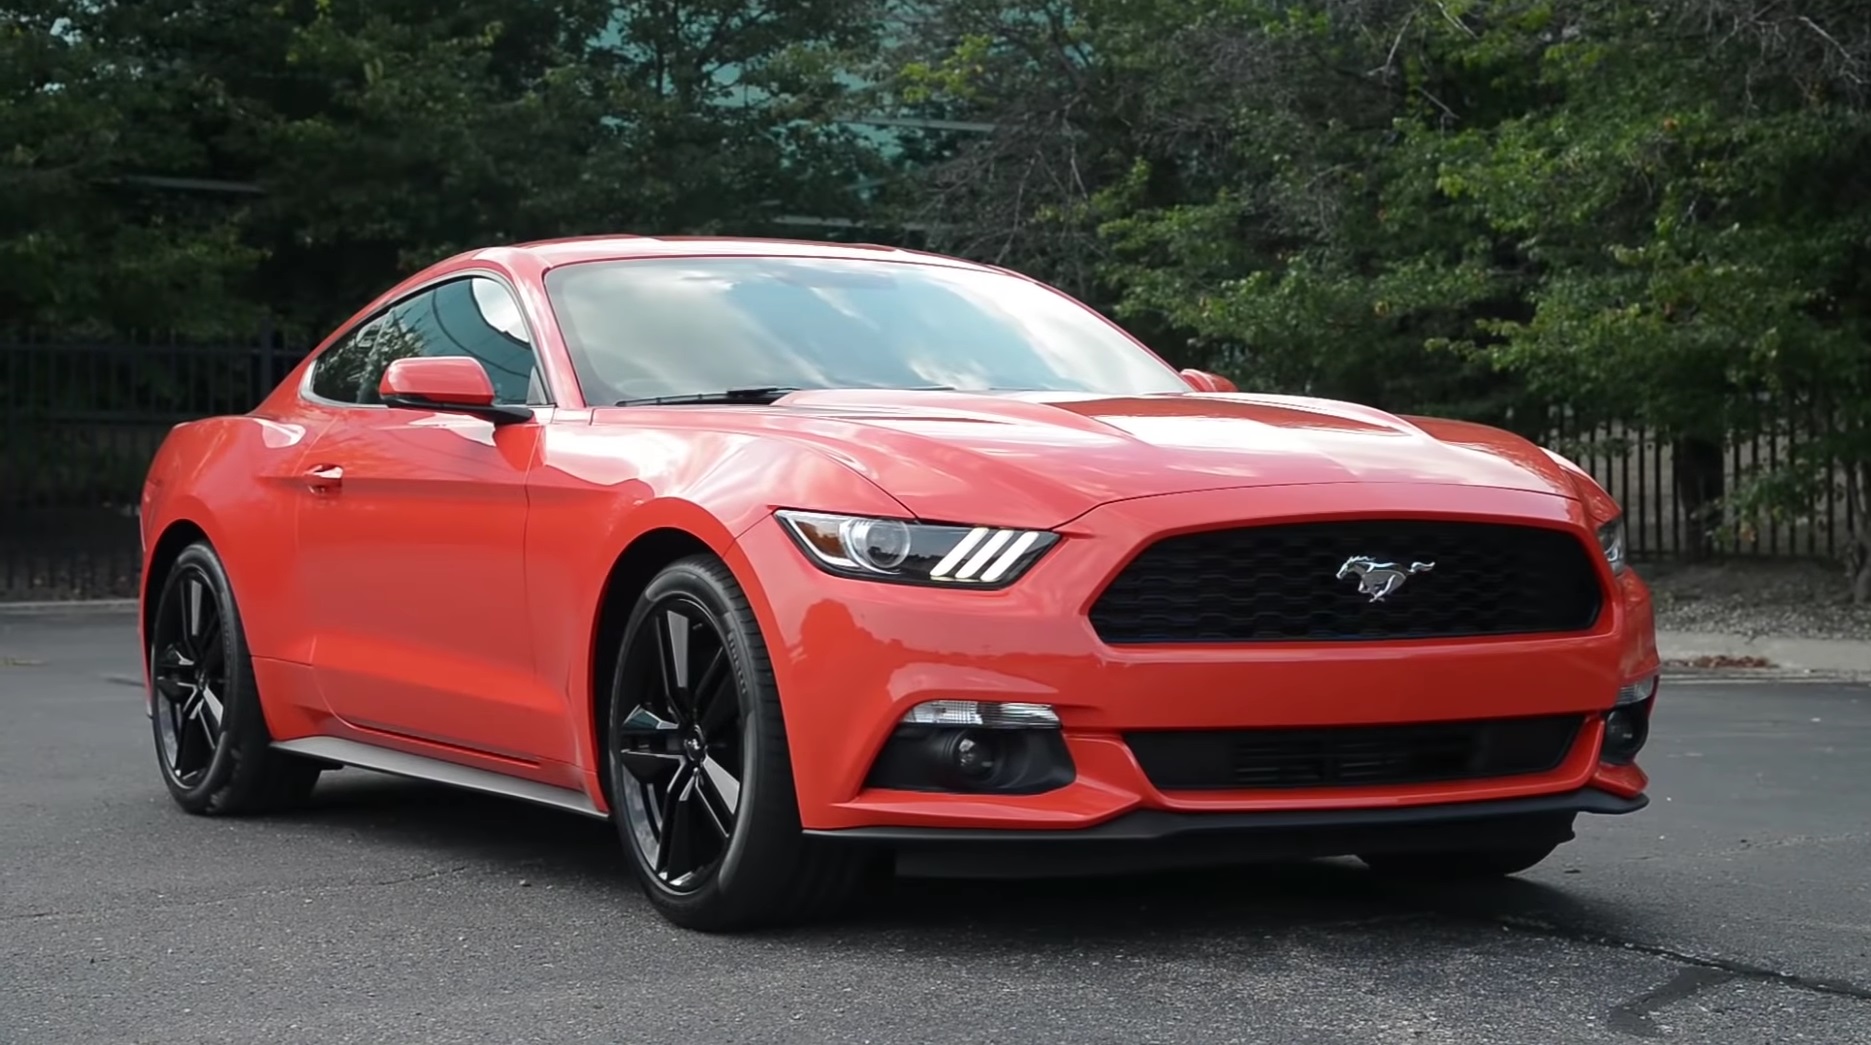 Video: 2015 Ford Mustang Ecoboost (Manual) - WR TV Extended POV Test Drive